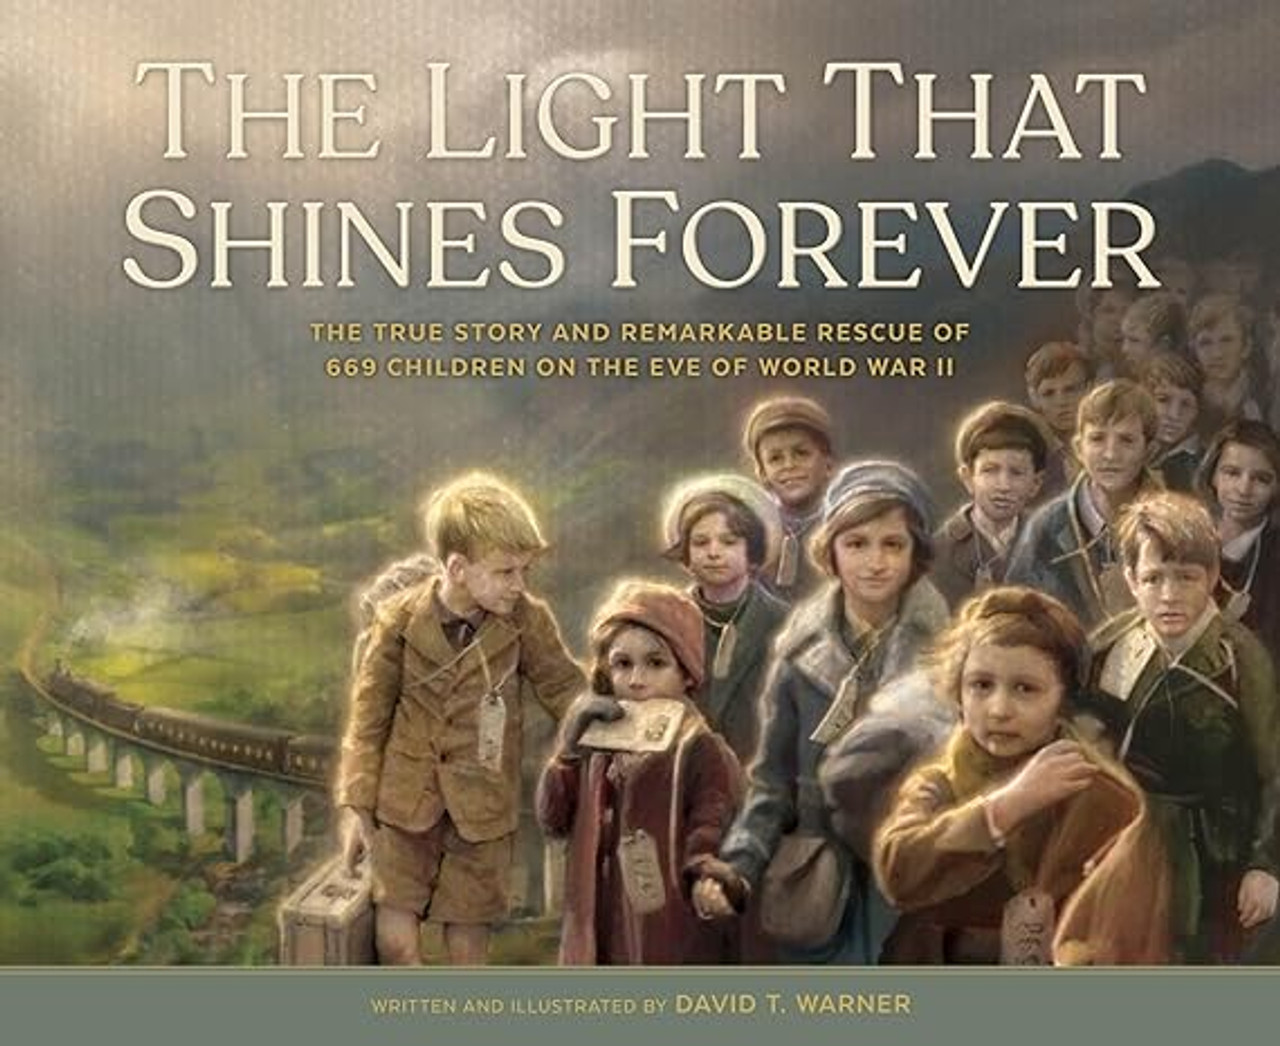 The Light that Shines Forever: The True Story and Remarkable Rescue of 669 Children of the Eve of WWII (Hardcover)*